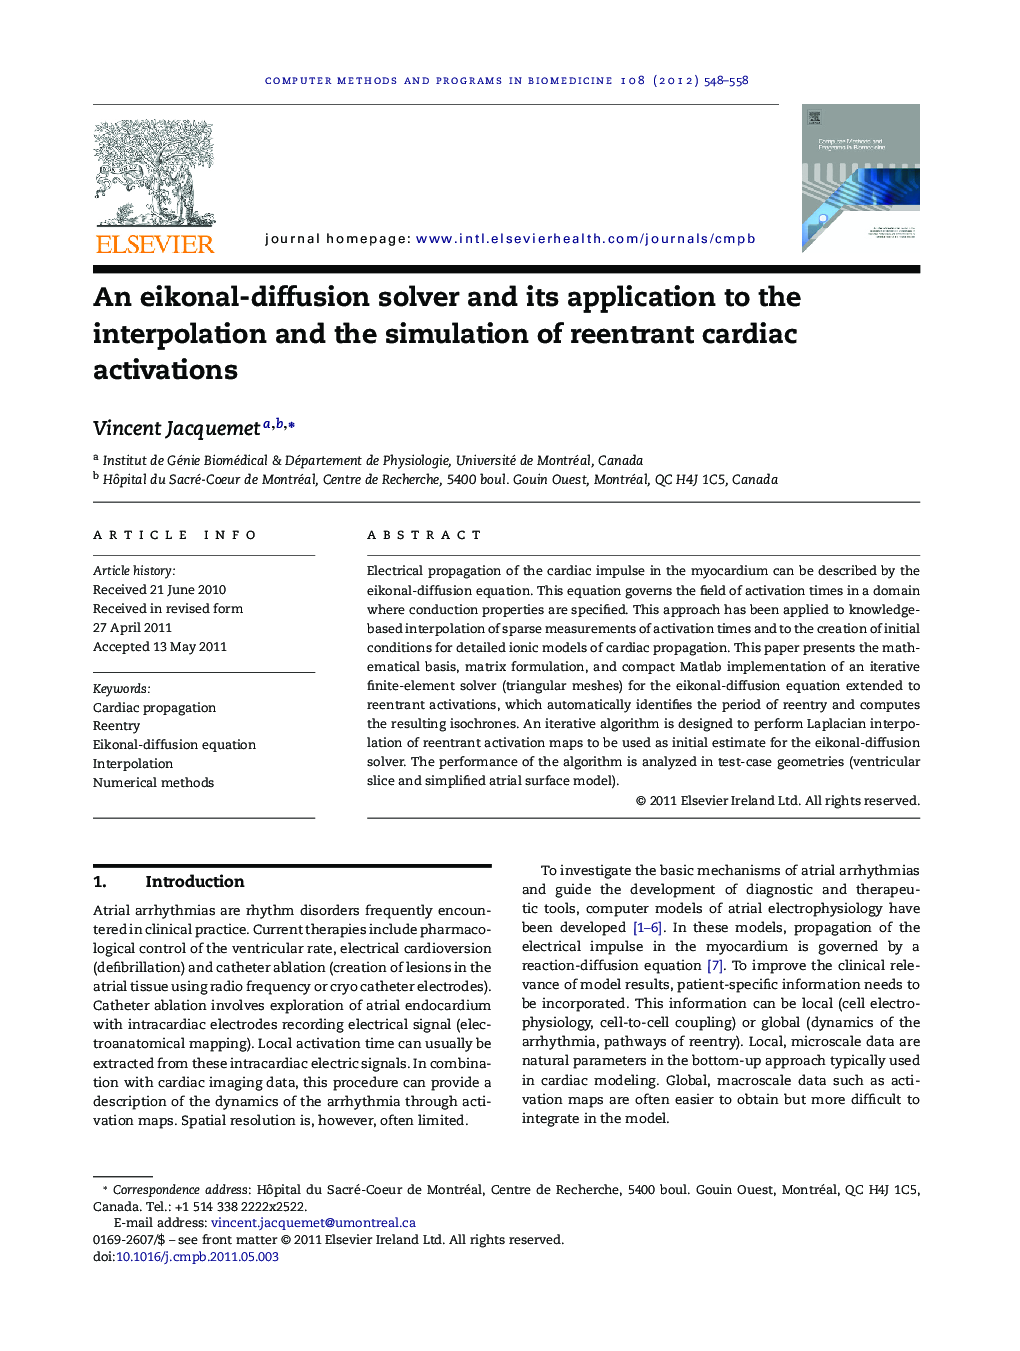 An eikonal-diffusion solver and its application to the interpolation and the simulation of reentrant cardiac activations